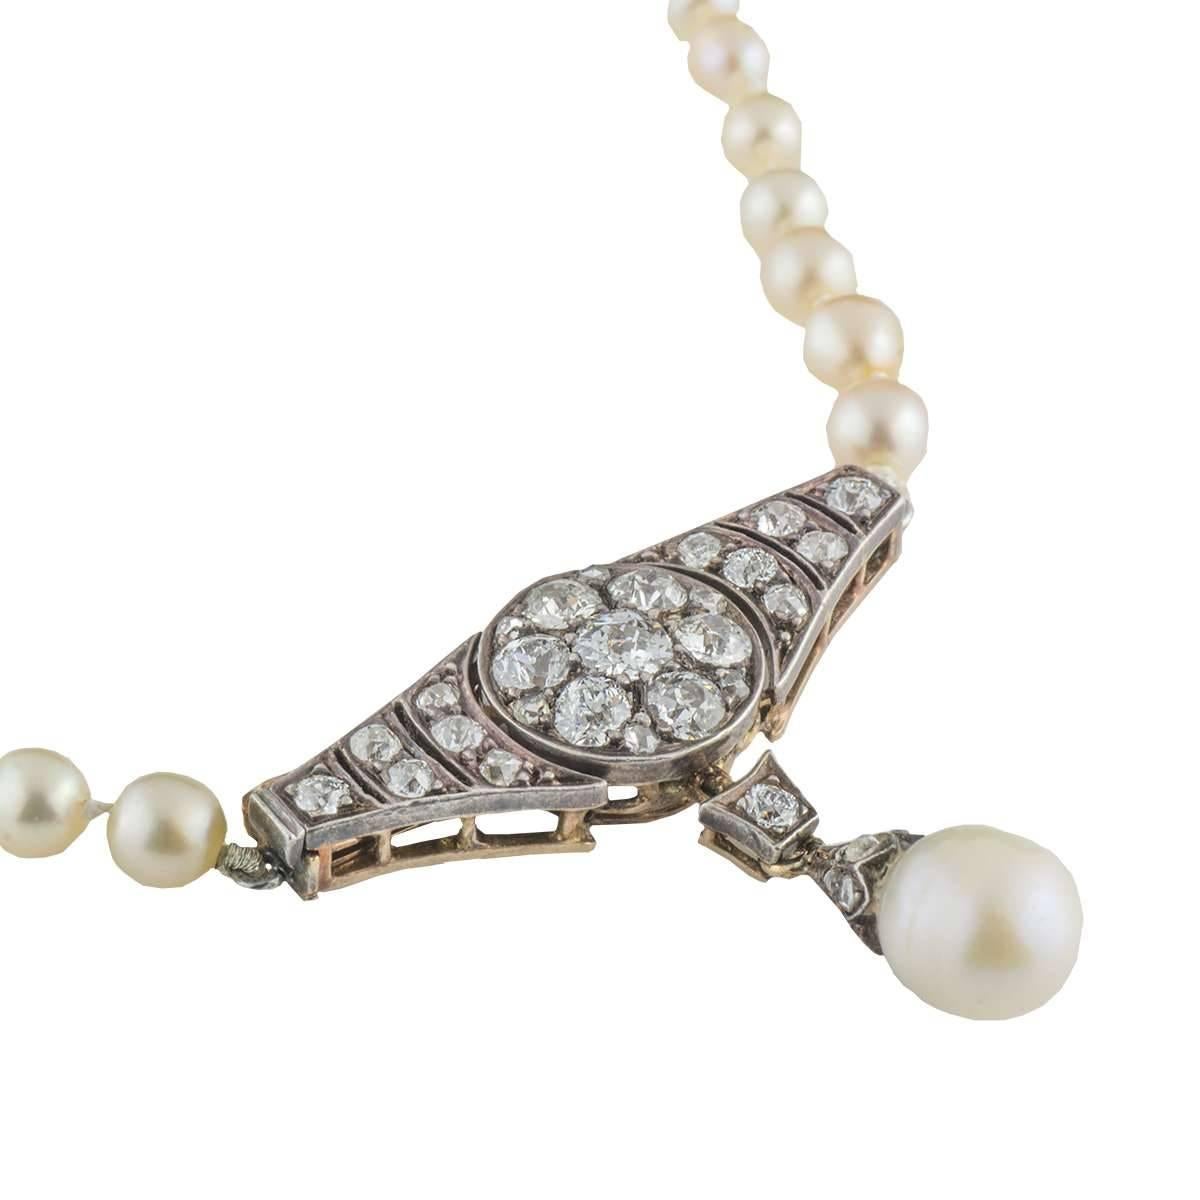 A beautiful natural pearl and diamond necklace from the early 20th century. The necklace consists of a rose gold and silver marquise link set horizontally with old cut diamonds, suspending a single diamond set link and a 7mm pearl. The diamonds are